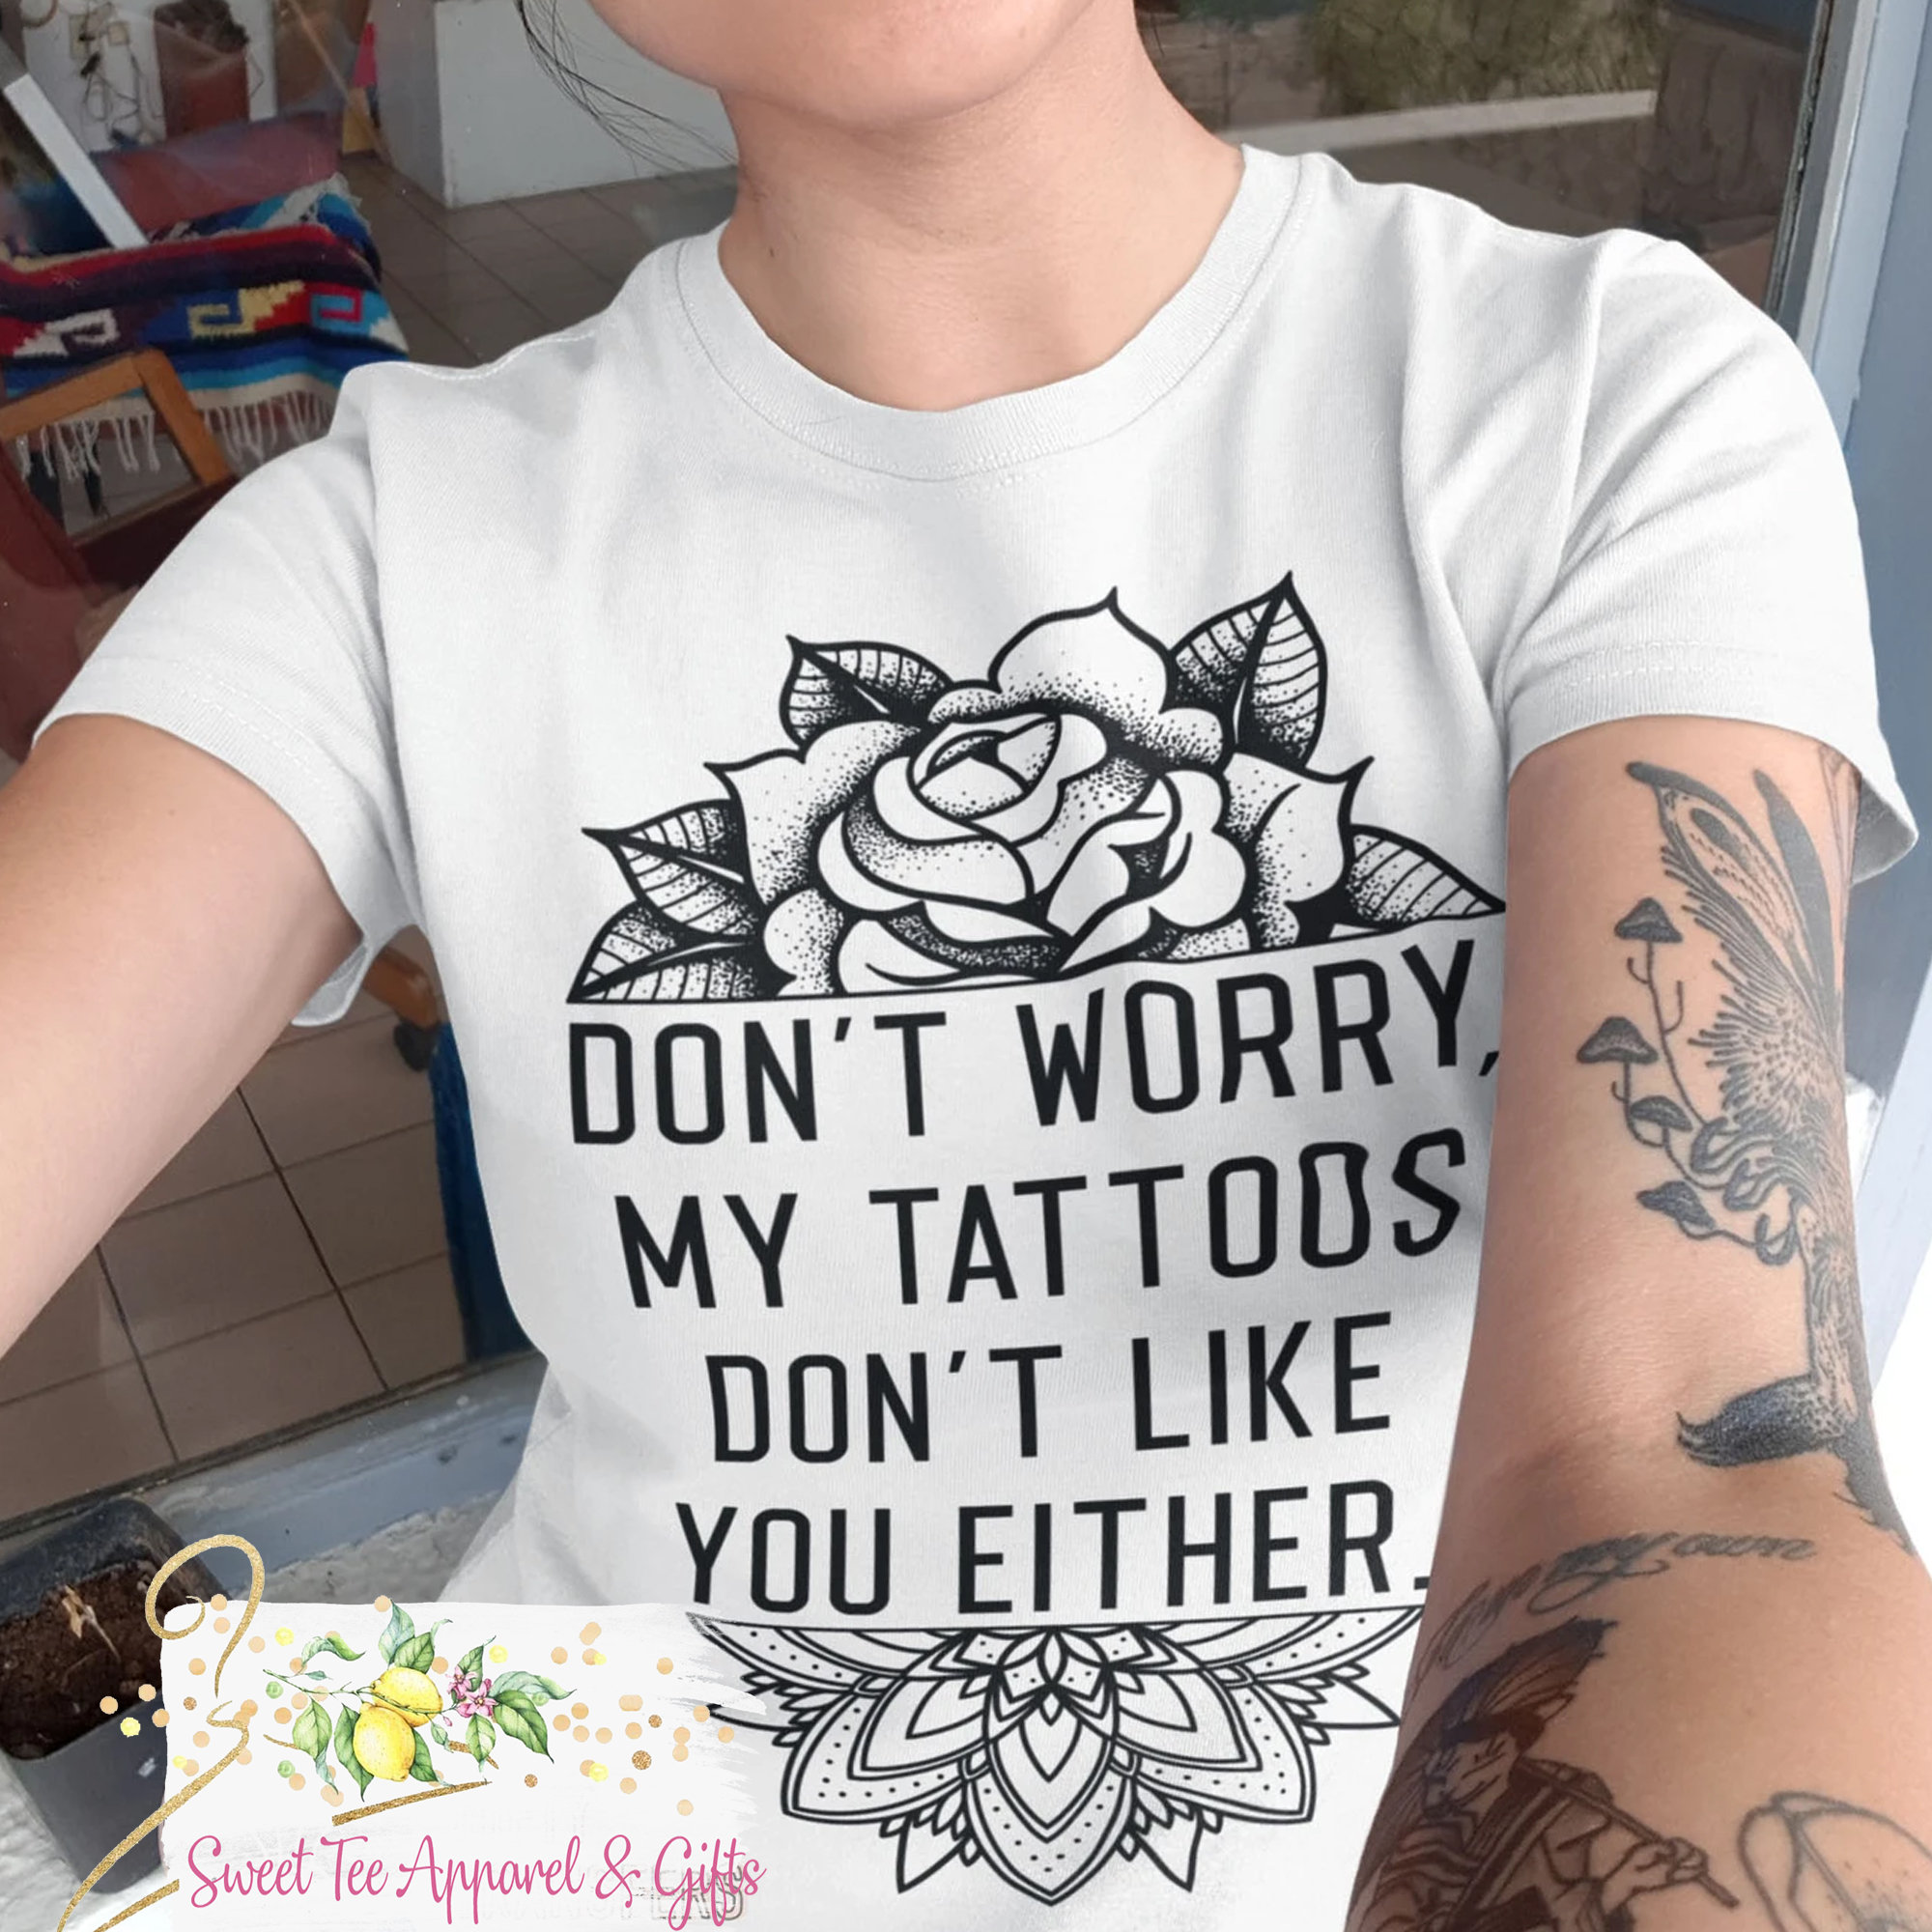 TATTOOS.ORG — I used to suffer from anxiety attacks so intense I...